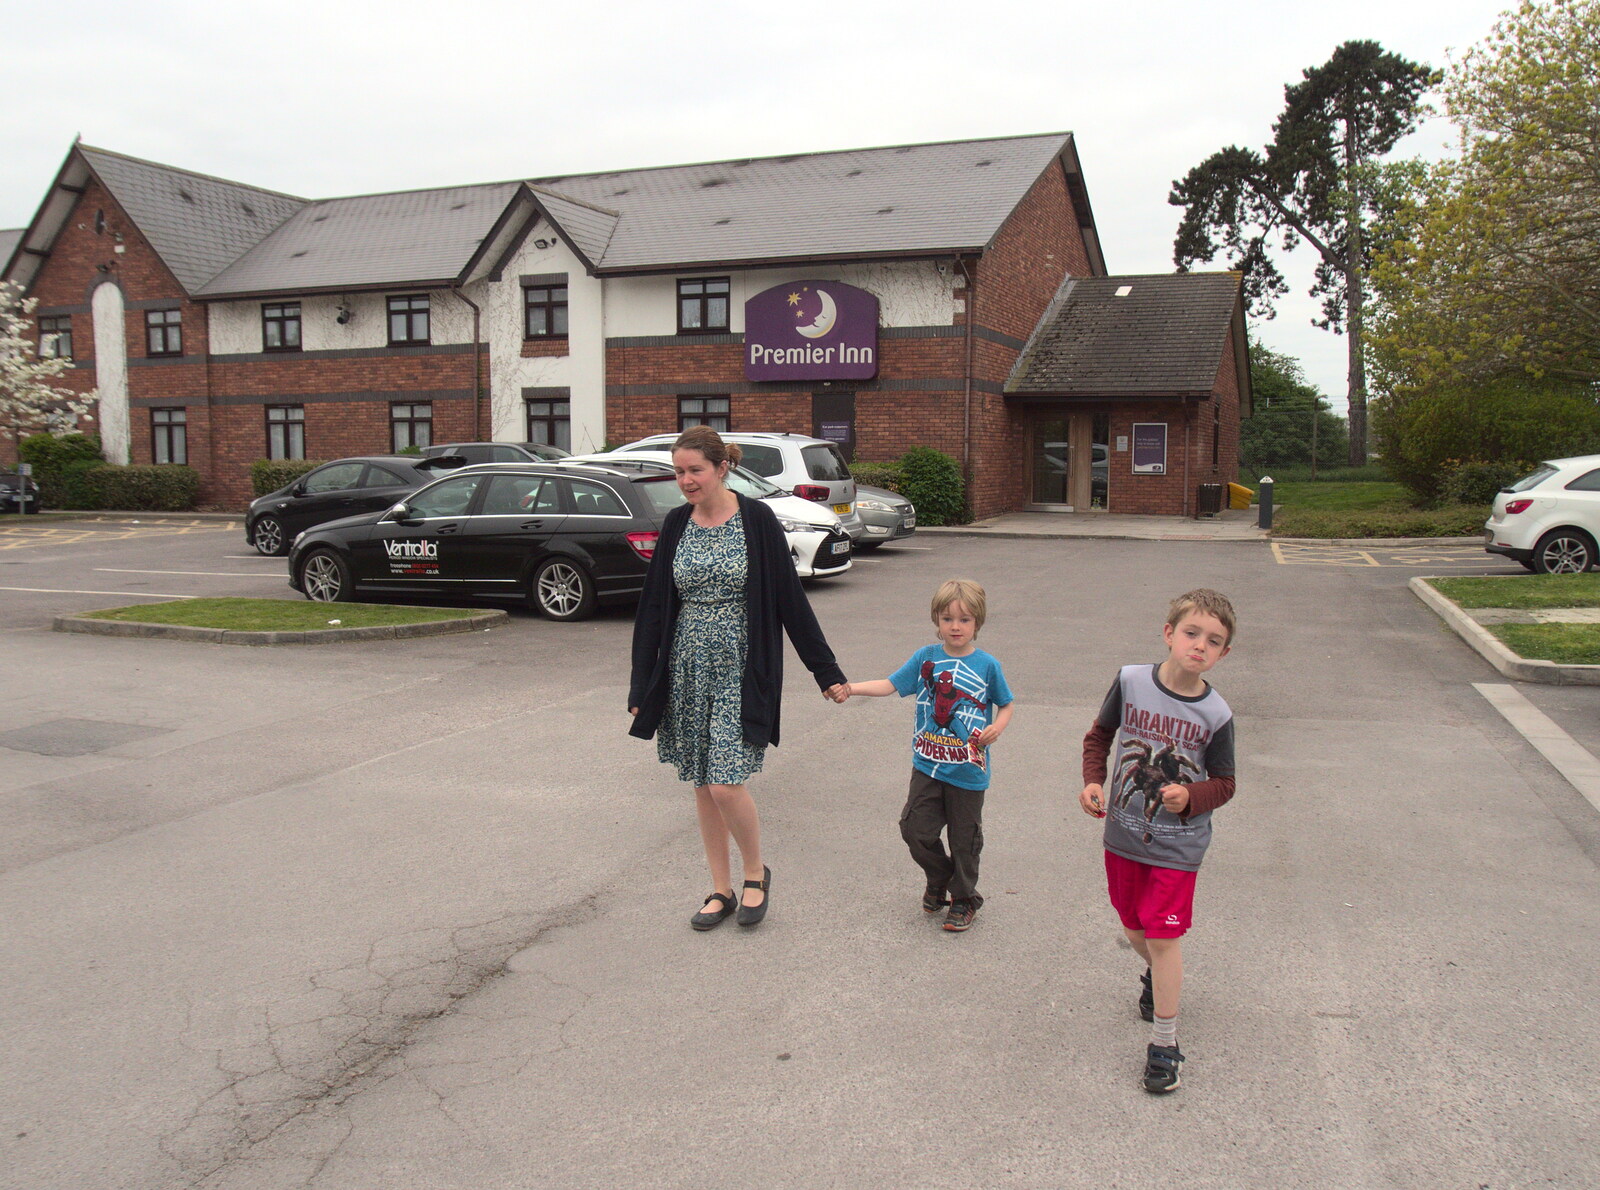 Time for breakfast at Taunton East Premier Inn from Grandma J's and a Day on the Beach, Spreyton and Exmouth, Devon - 13th April 2017